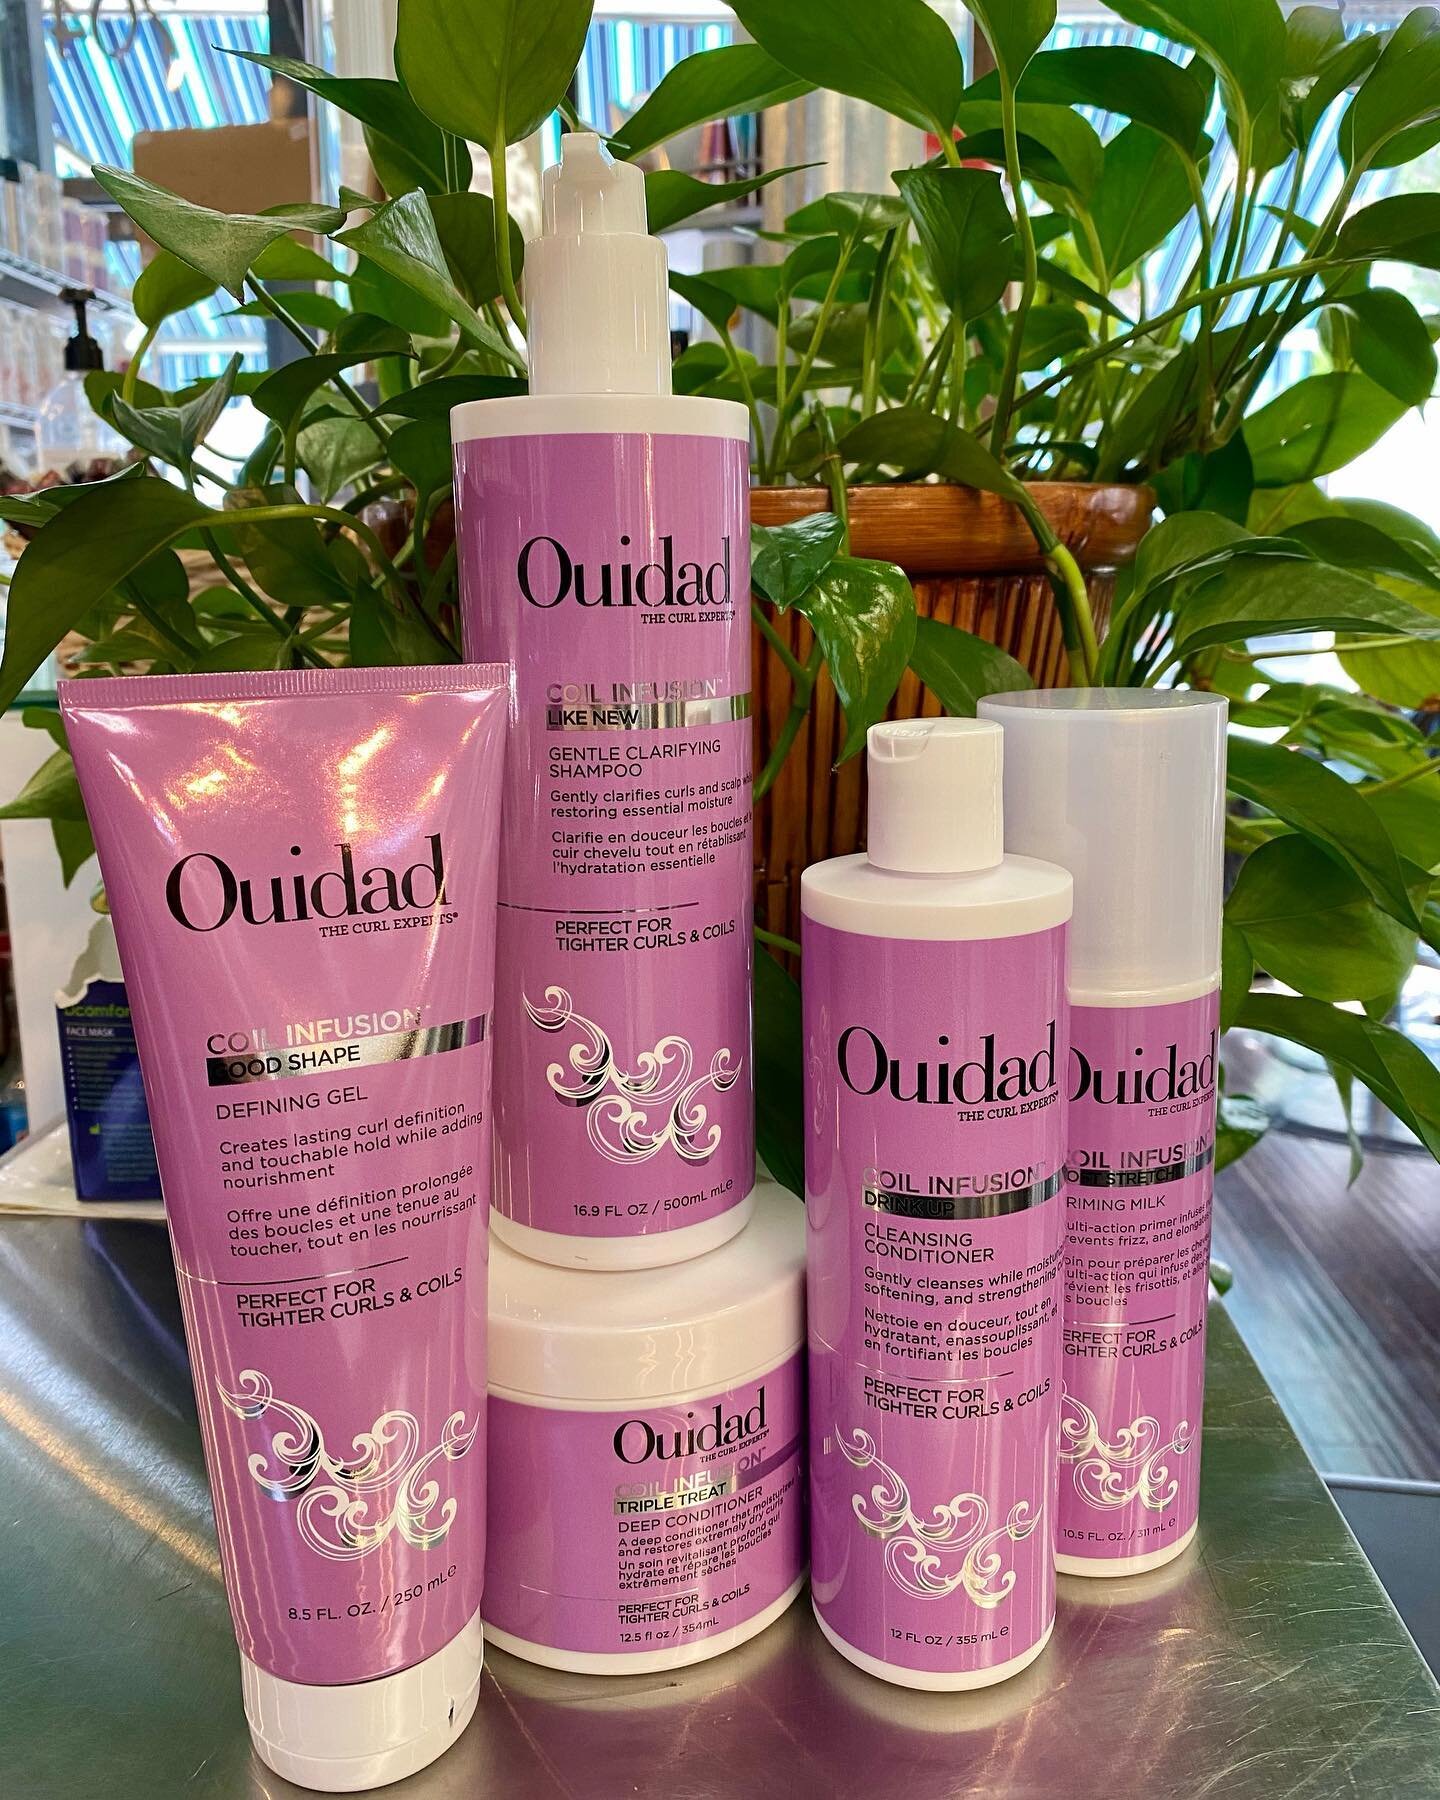 NEW IN STOCK! Ouidad Coil Infusion line is now at Wavelengths! Perfect for those with tighter curls and coils! 😍
.
.
.
.
#ouidadcurls #ouidad #newproduct #curlsfordays